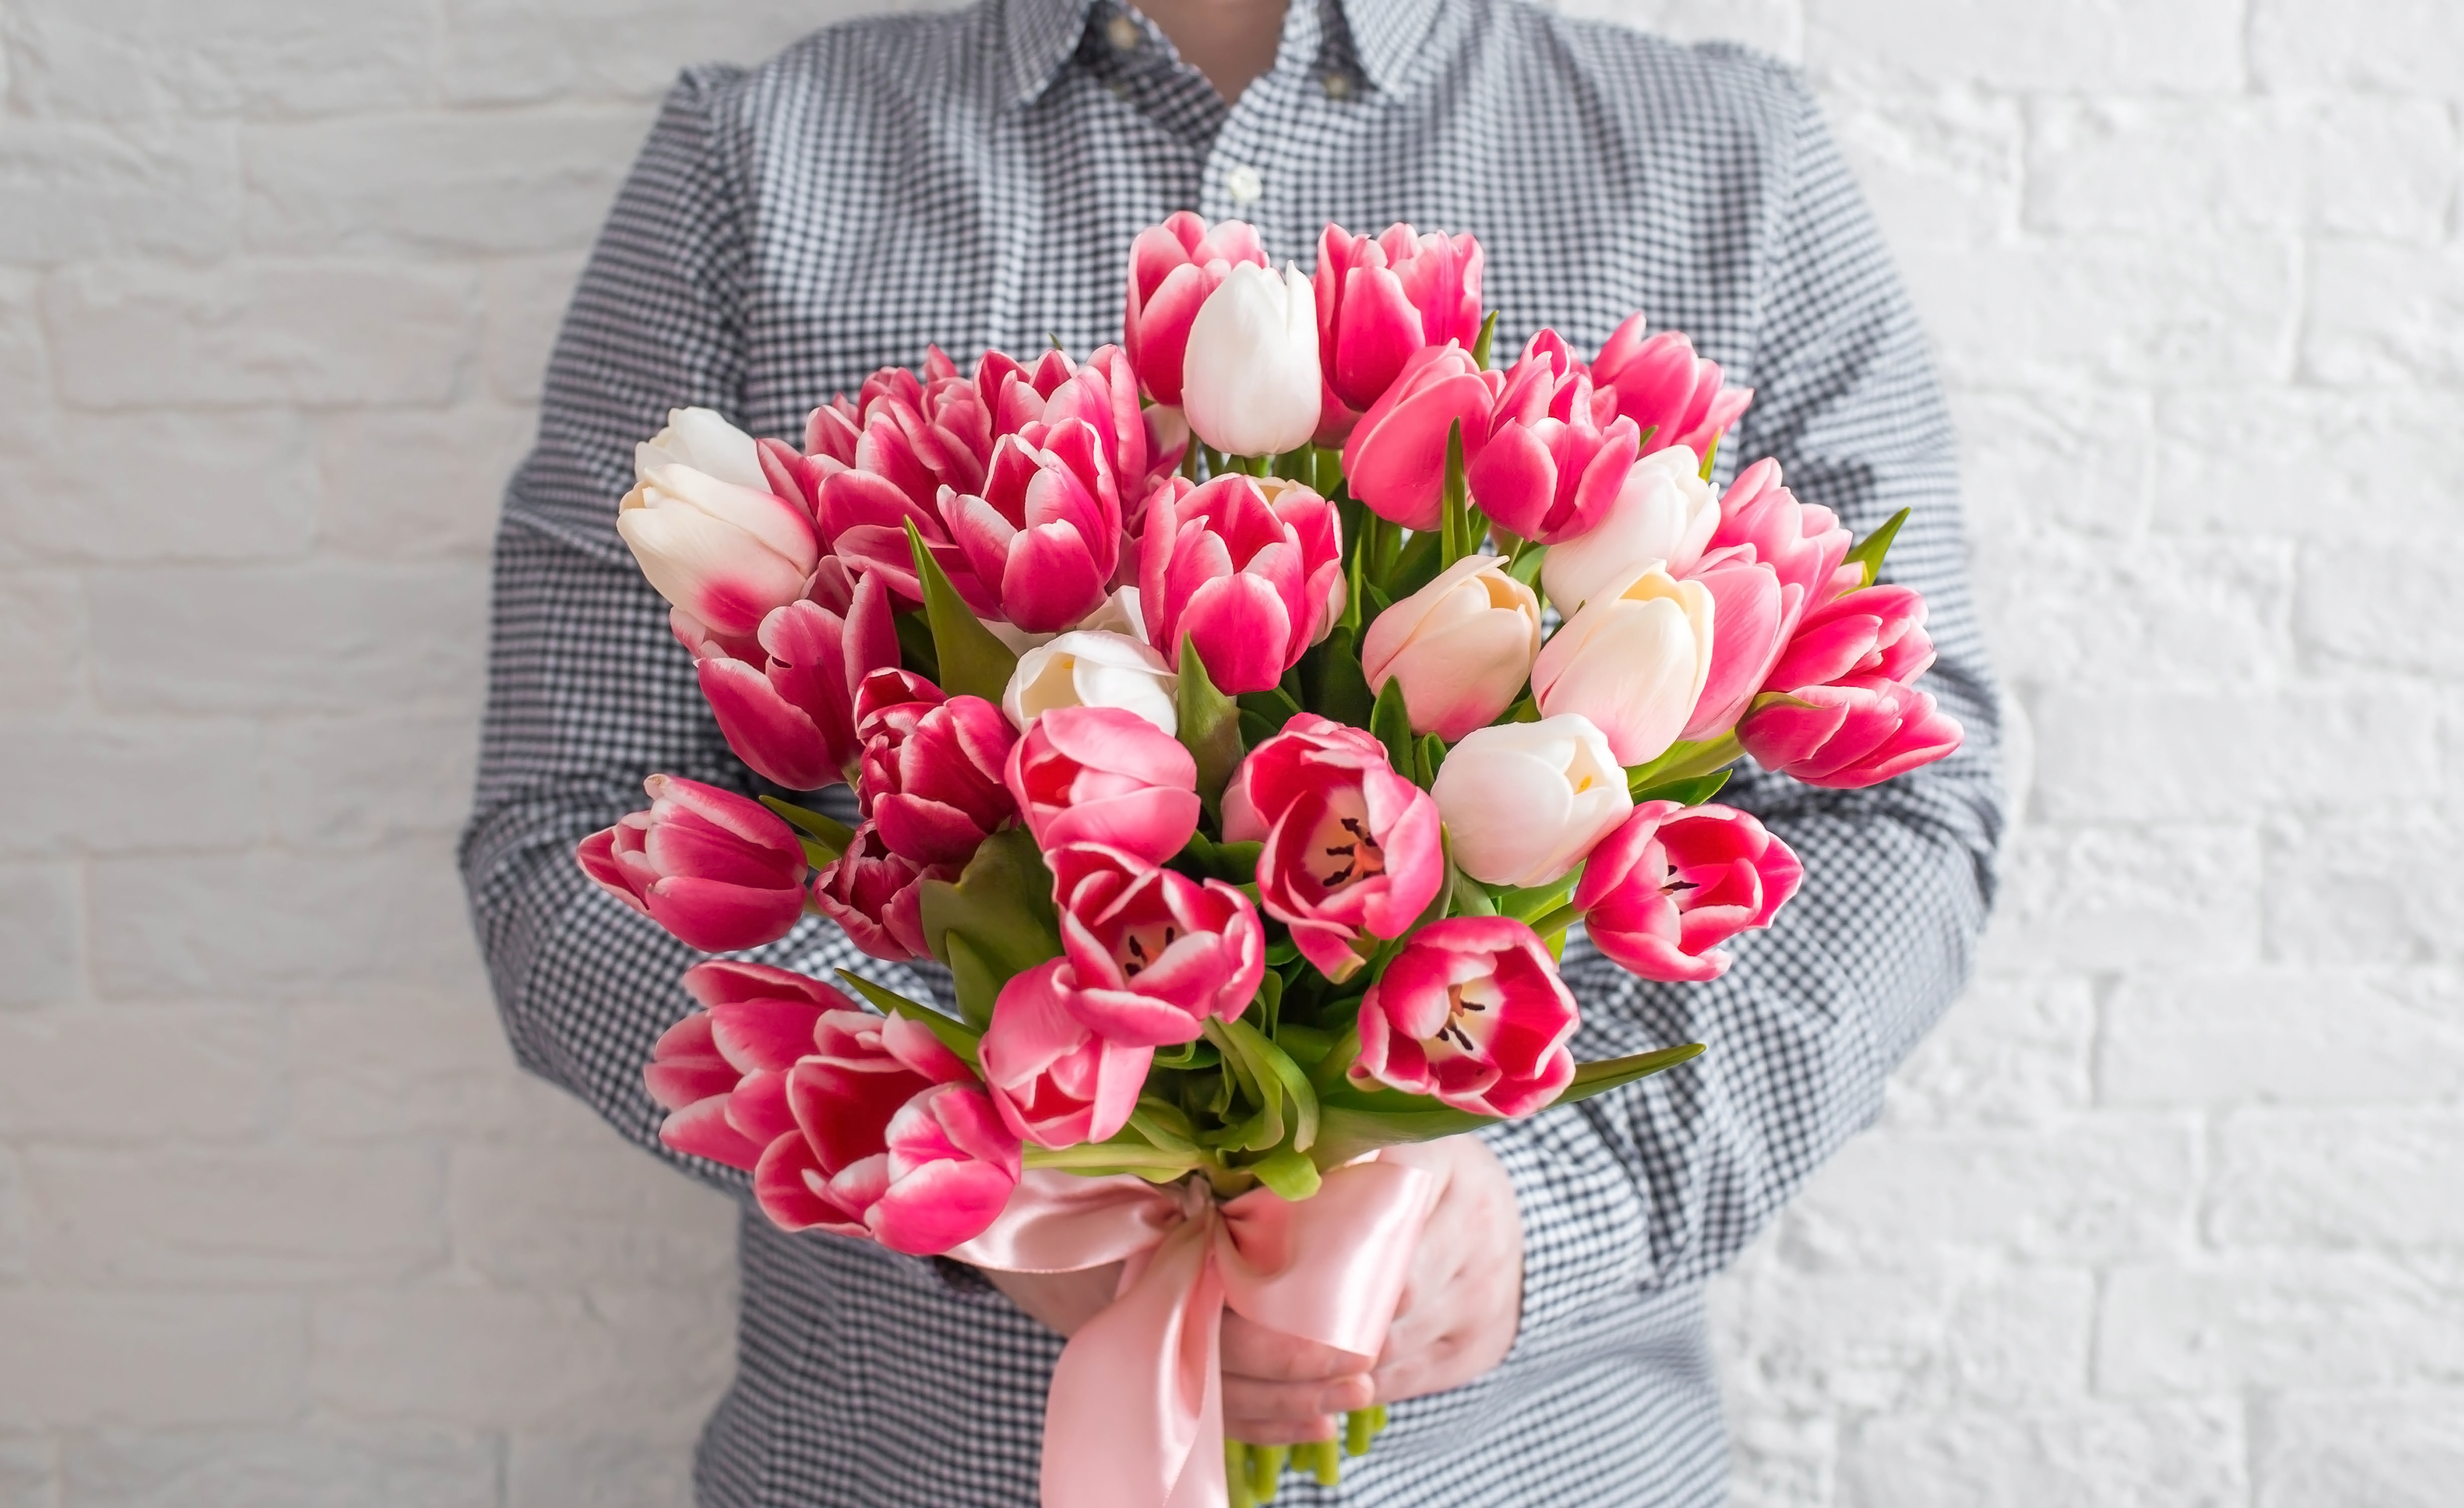 A young man holding flowers | Source: Shutterstock